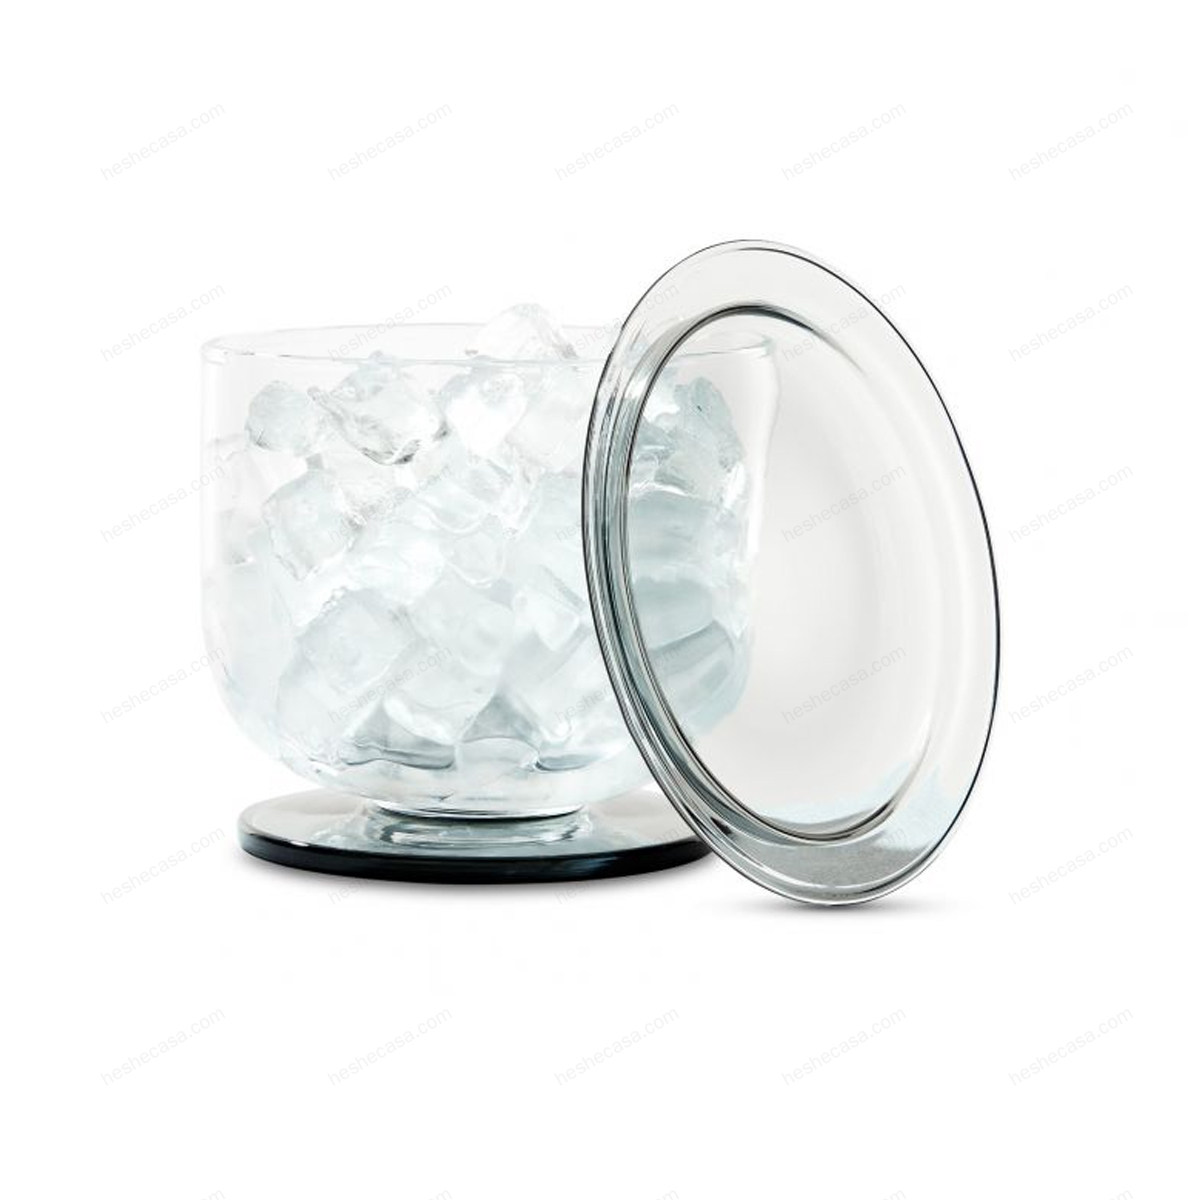 Puck Ice Bucket 冰桶